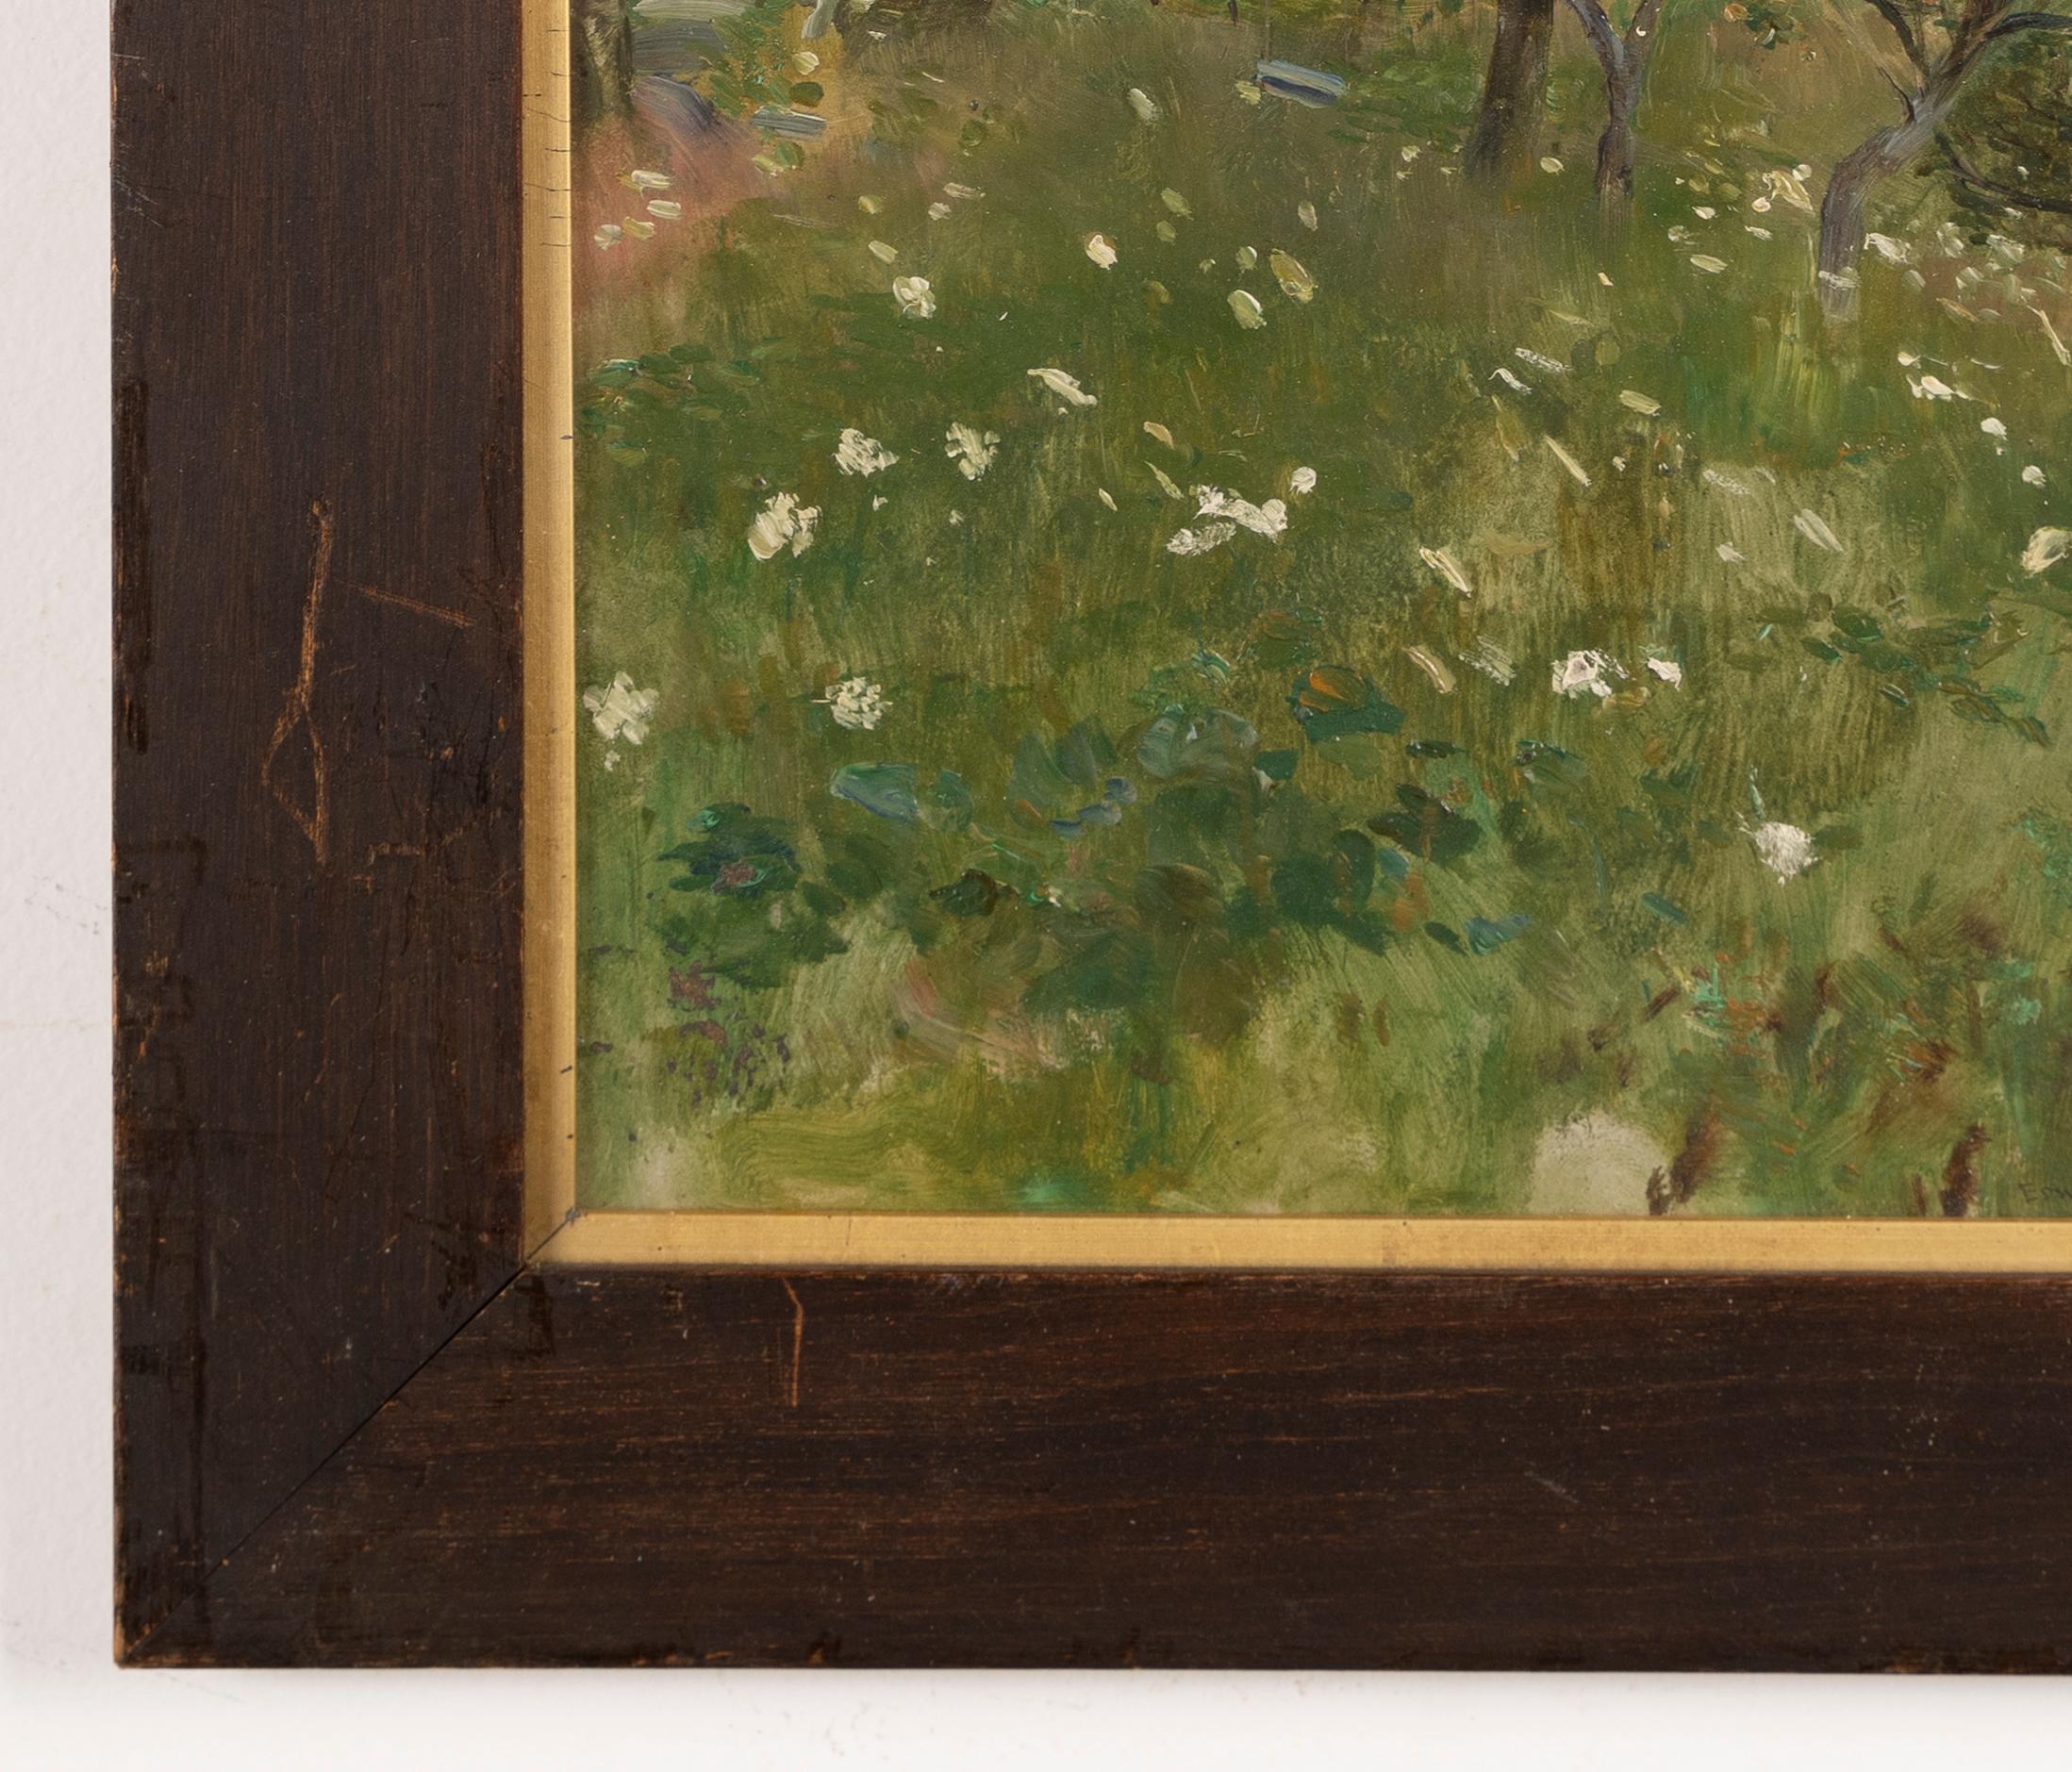 Antique American impressionist flower landscape oil painting by Edward S Annison.  Oil on board, circa 1910.  Signed.  Image size, 9L x 12H.  Housed in a period  frame.